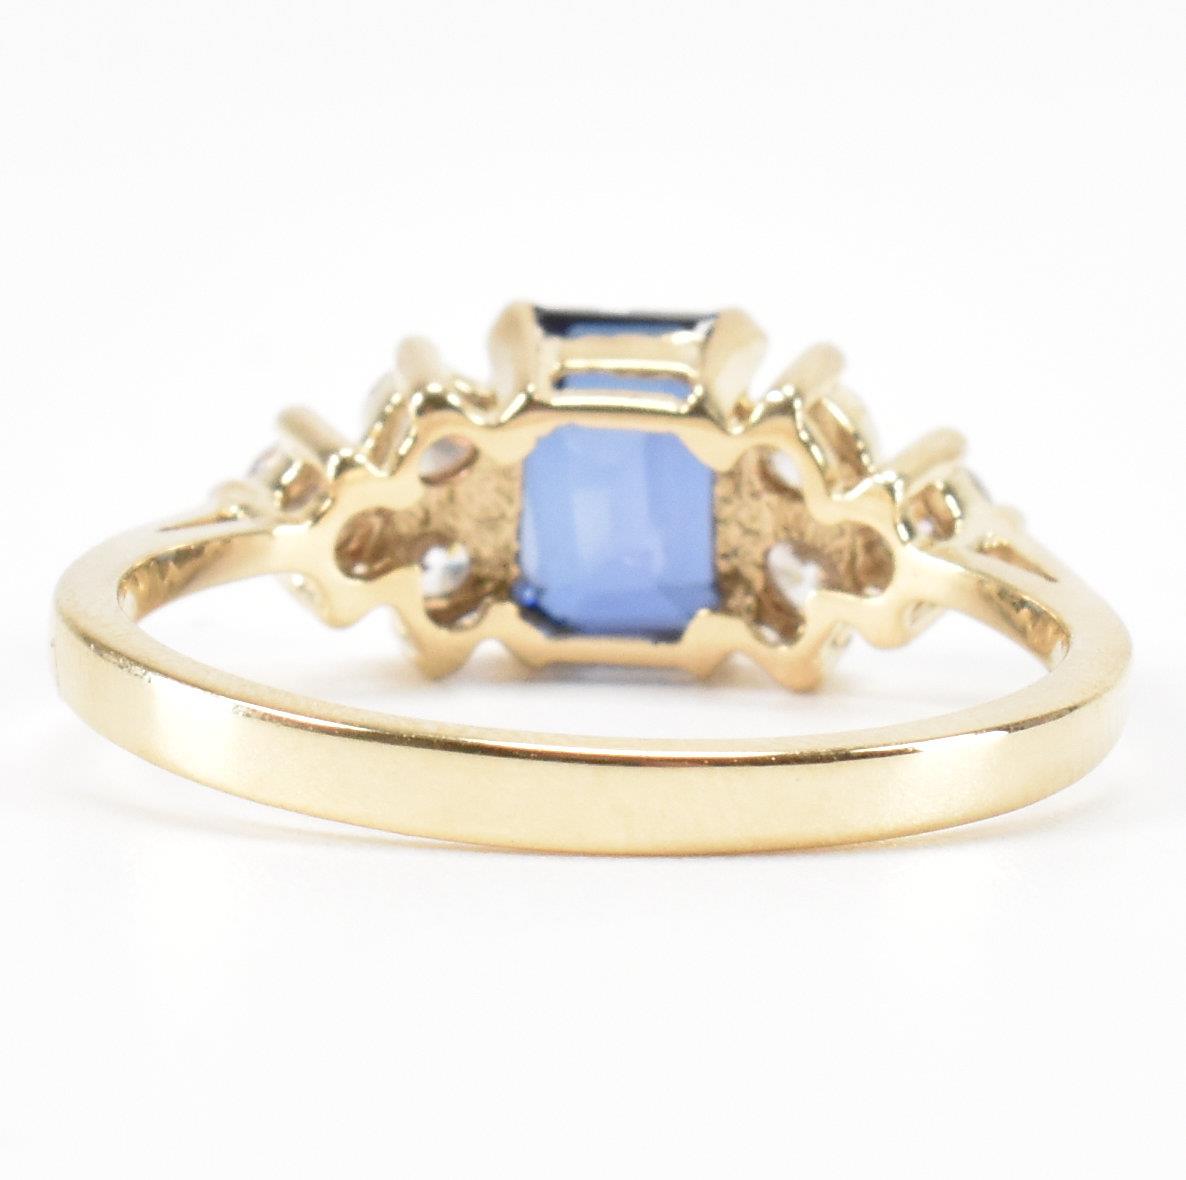 HALLMARKED 9CT GOLD SYNTHETIC SAPPHIRE & CZ THREE STONE RING - Image 4 of 8